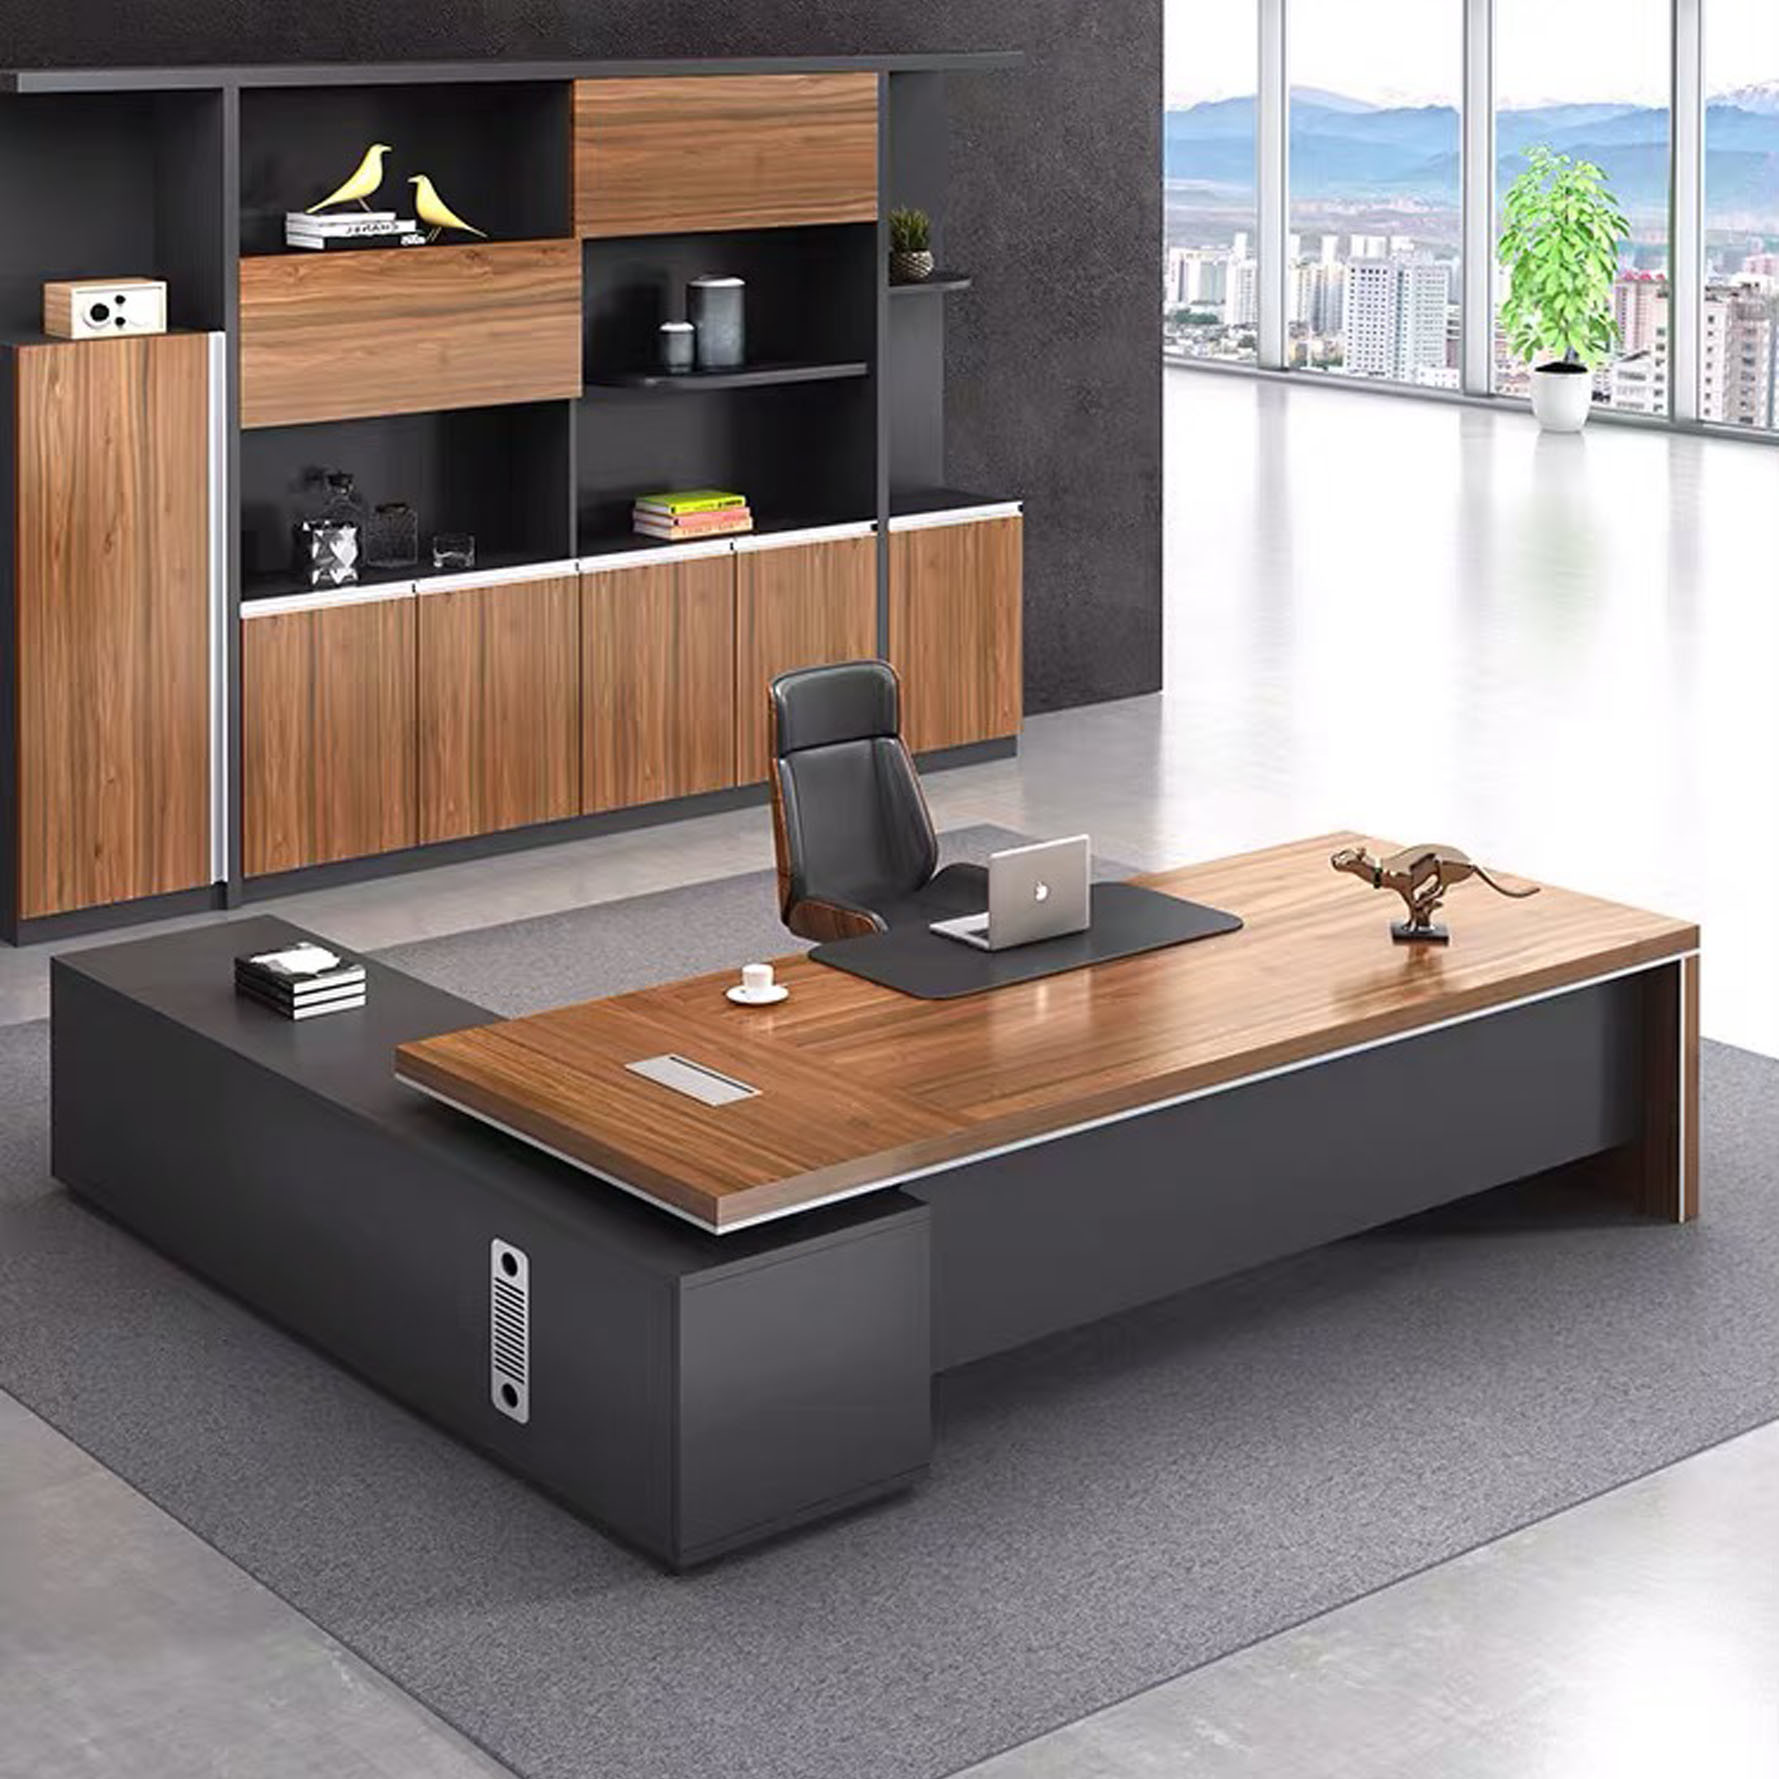 How to Look After Your Office Furniture?